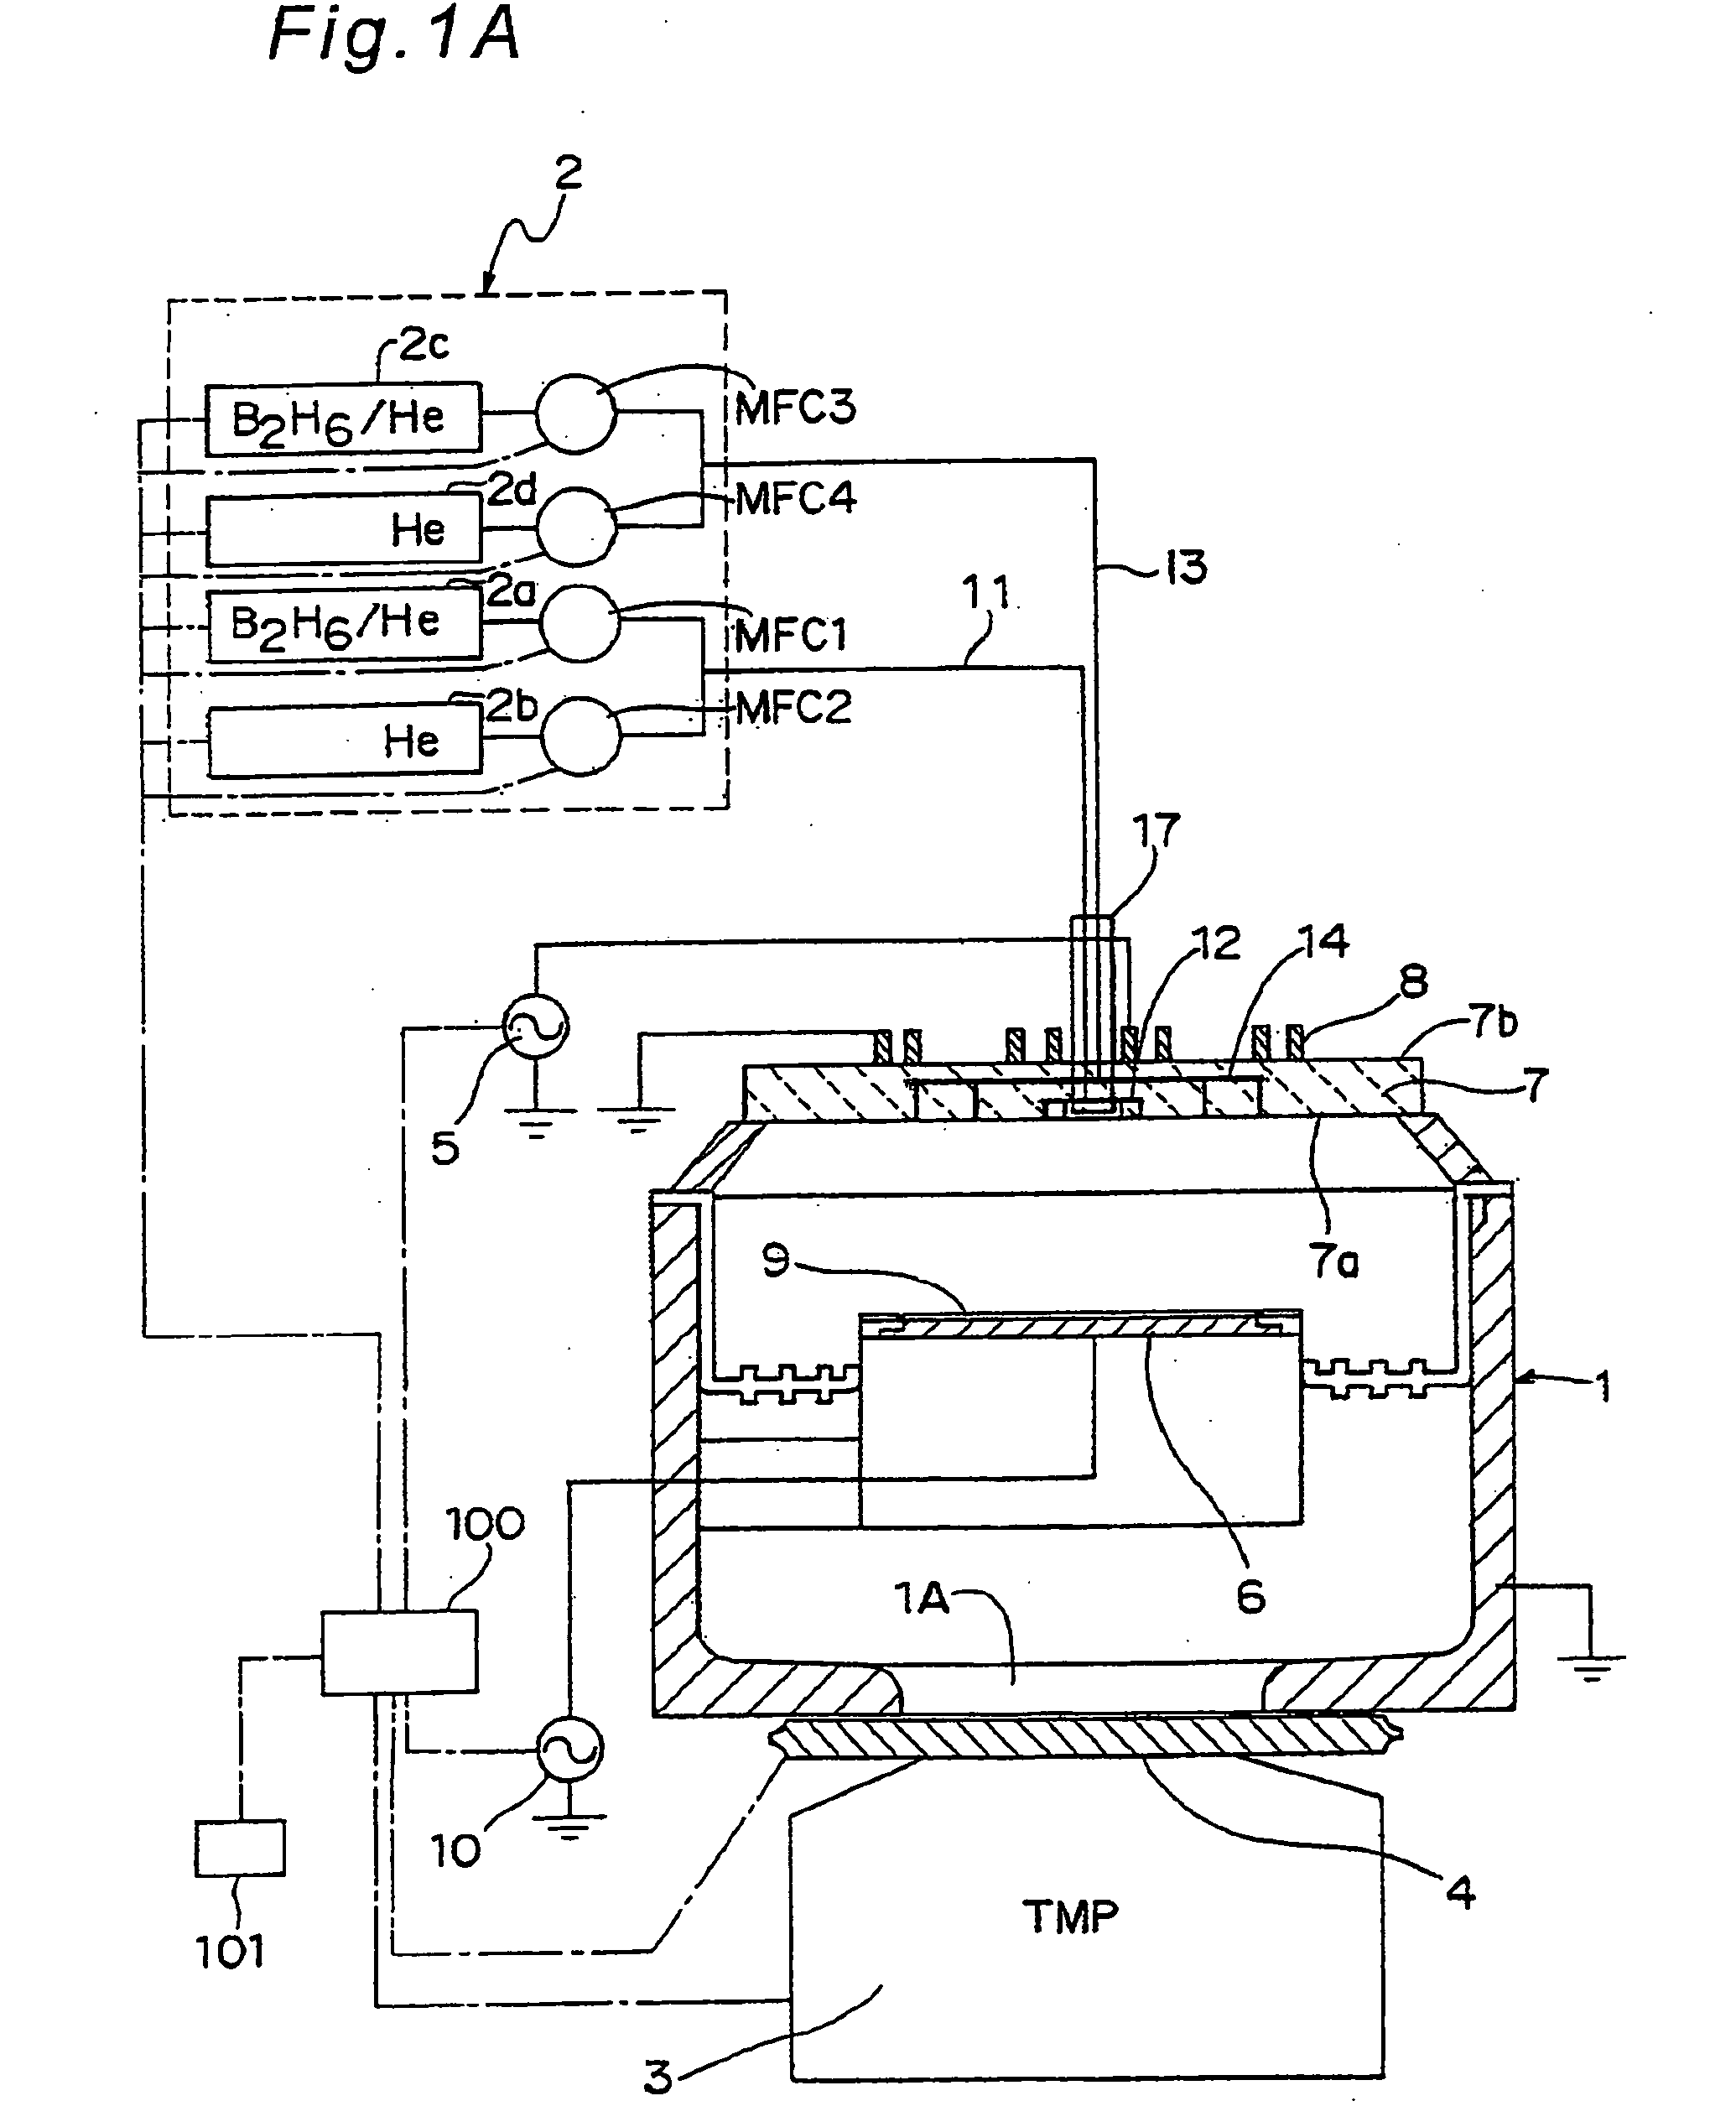 Apparatus and method for plasma doping